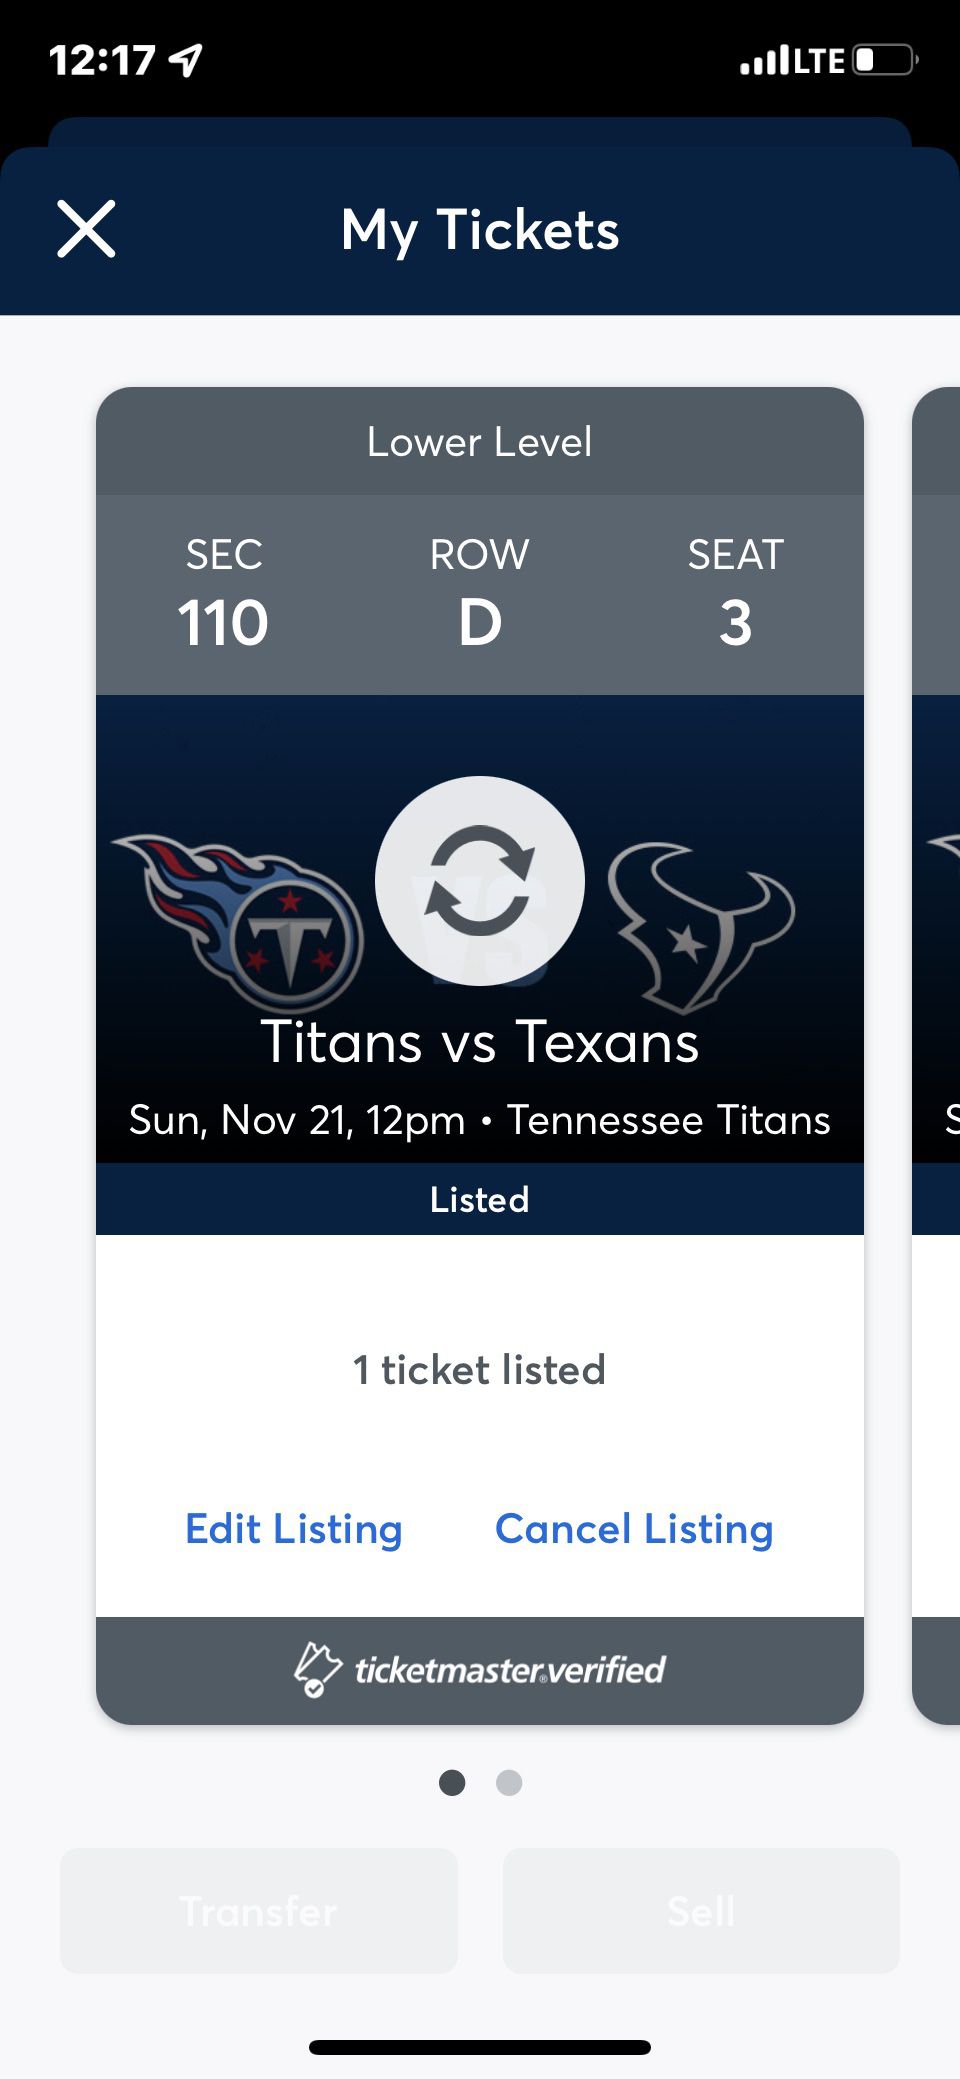 Lower Level 4th Row Titans v Texans Tickets